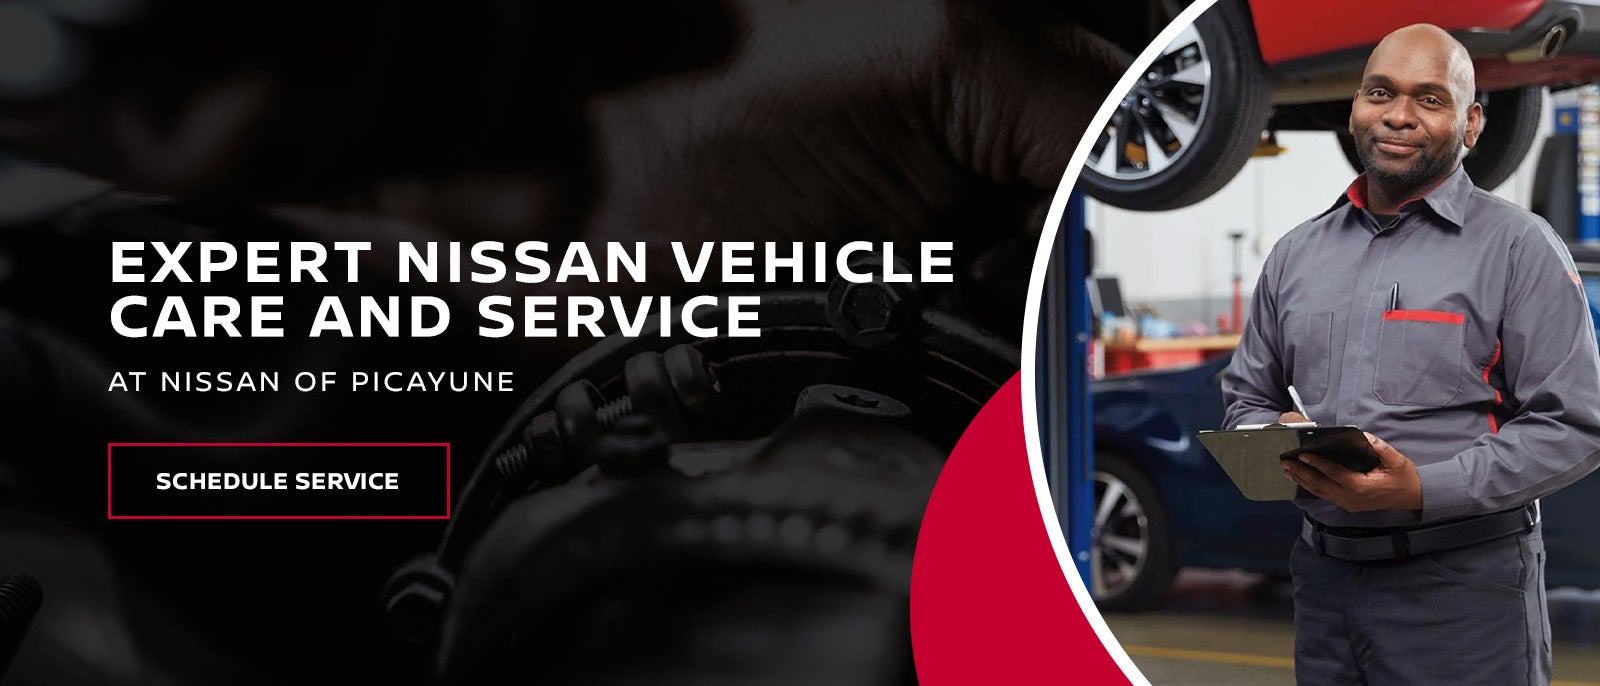 Expert Nissan Vehicle Care and Service 